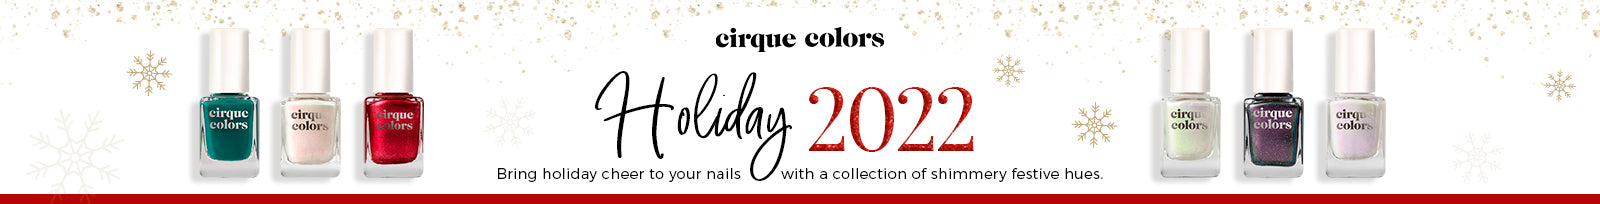 Cirque Colors Holiday 2022 Collection